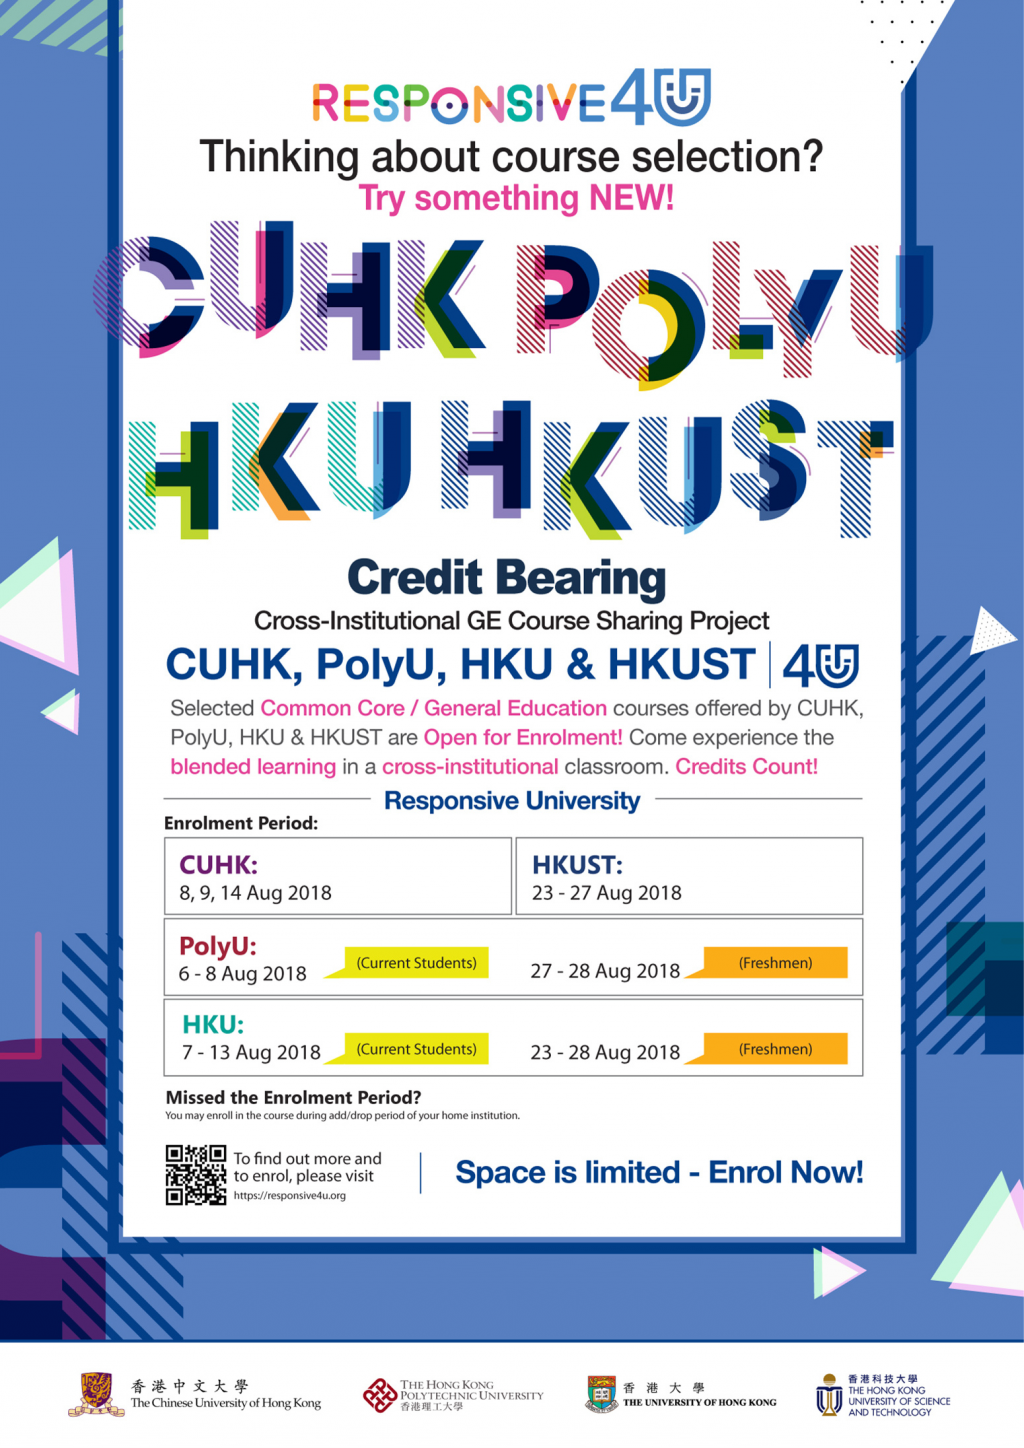 Responsive 4U: Cross-Institutional Course Sharing Project at HKU, CUHK, PolyU and HKUST Open for Enrolment